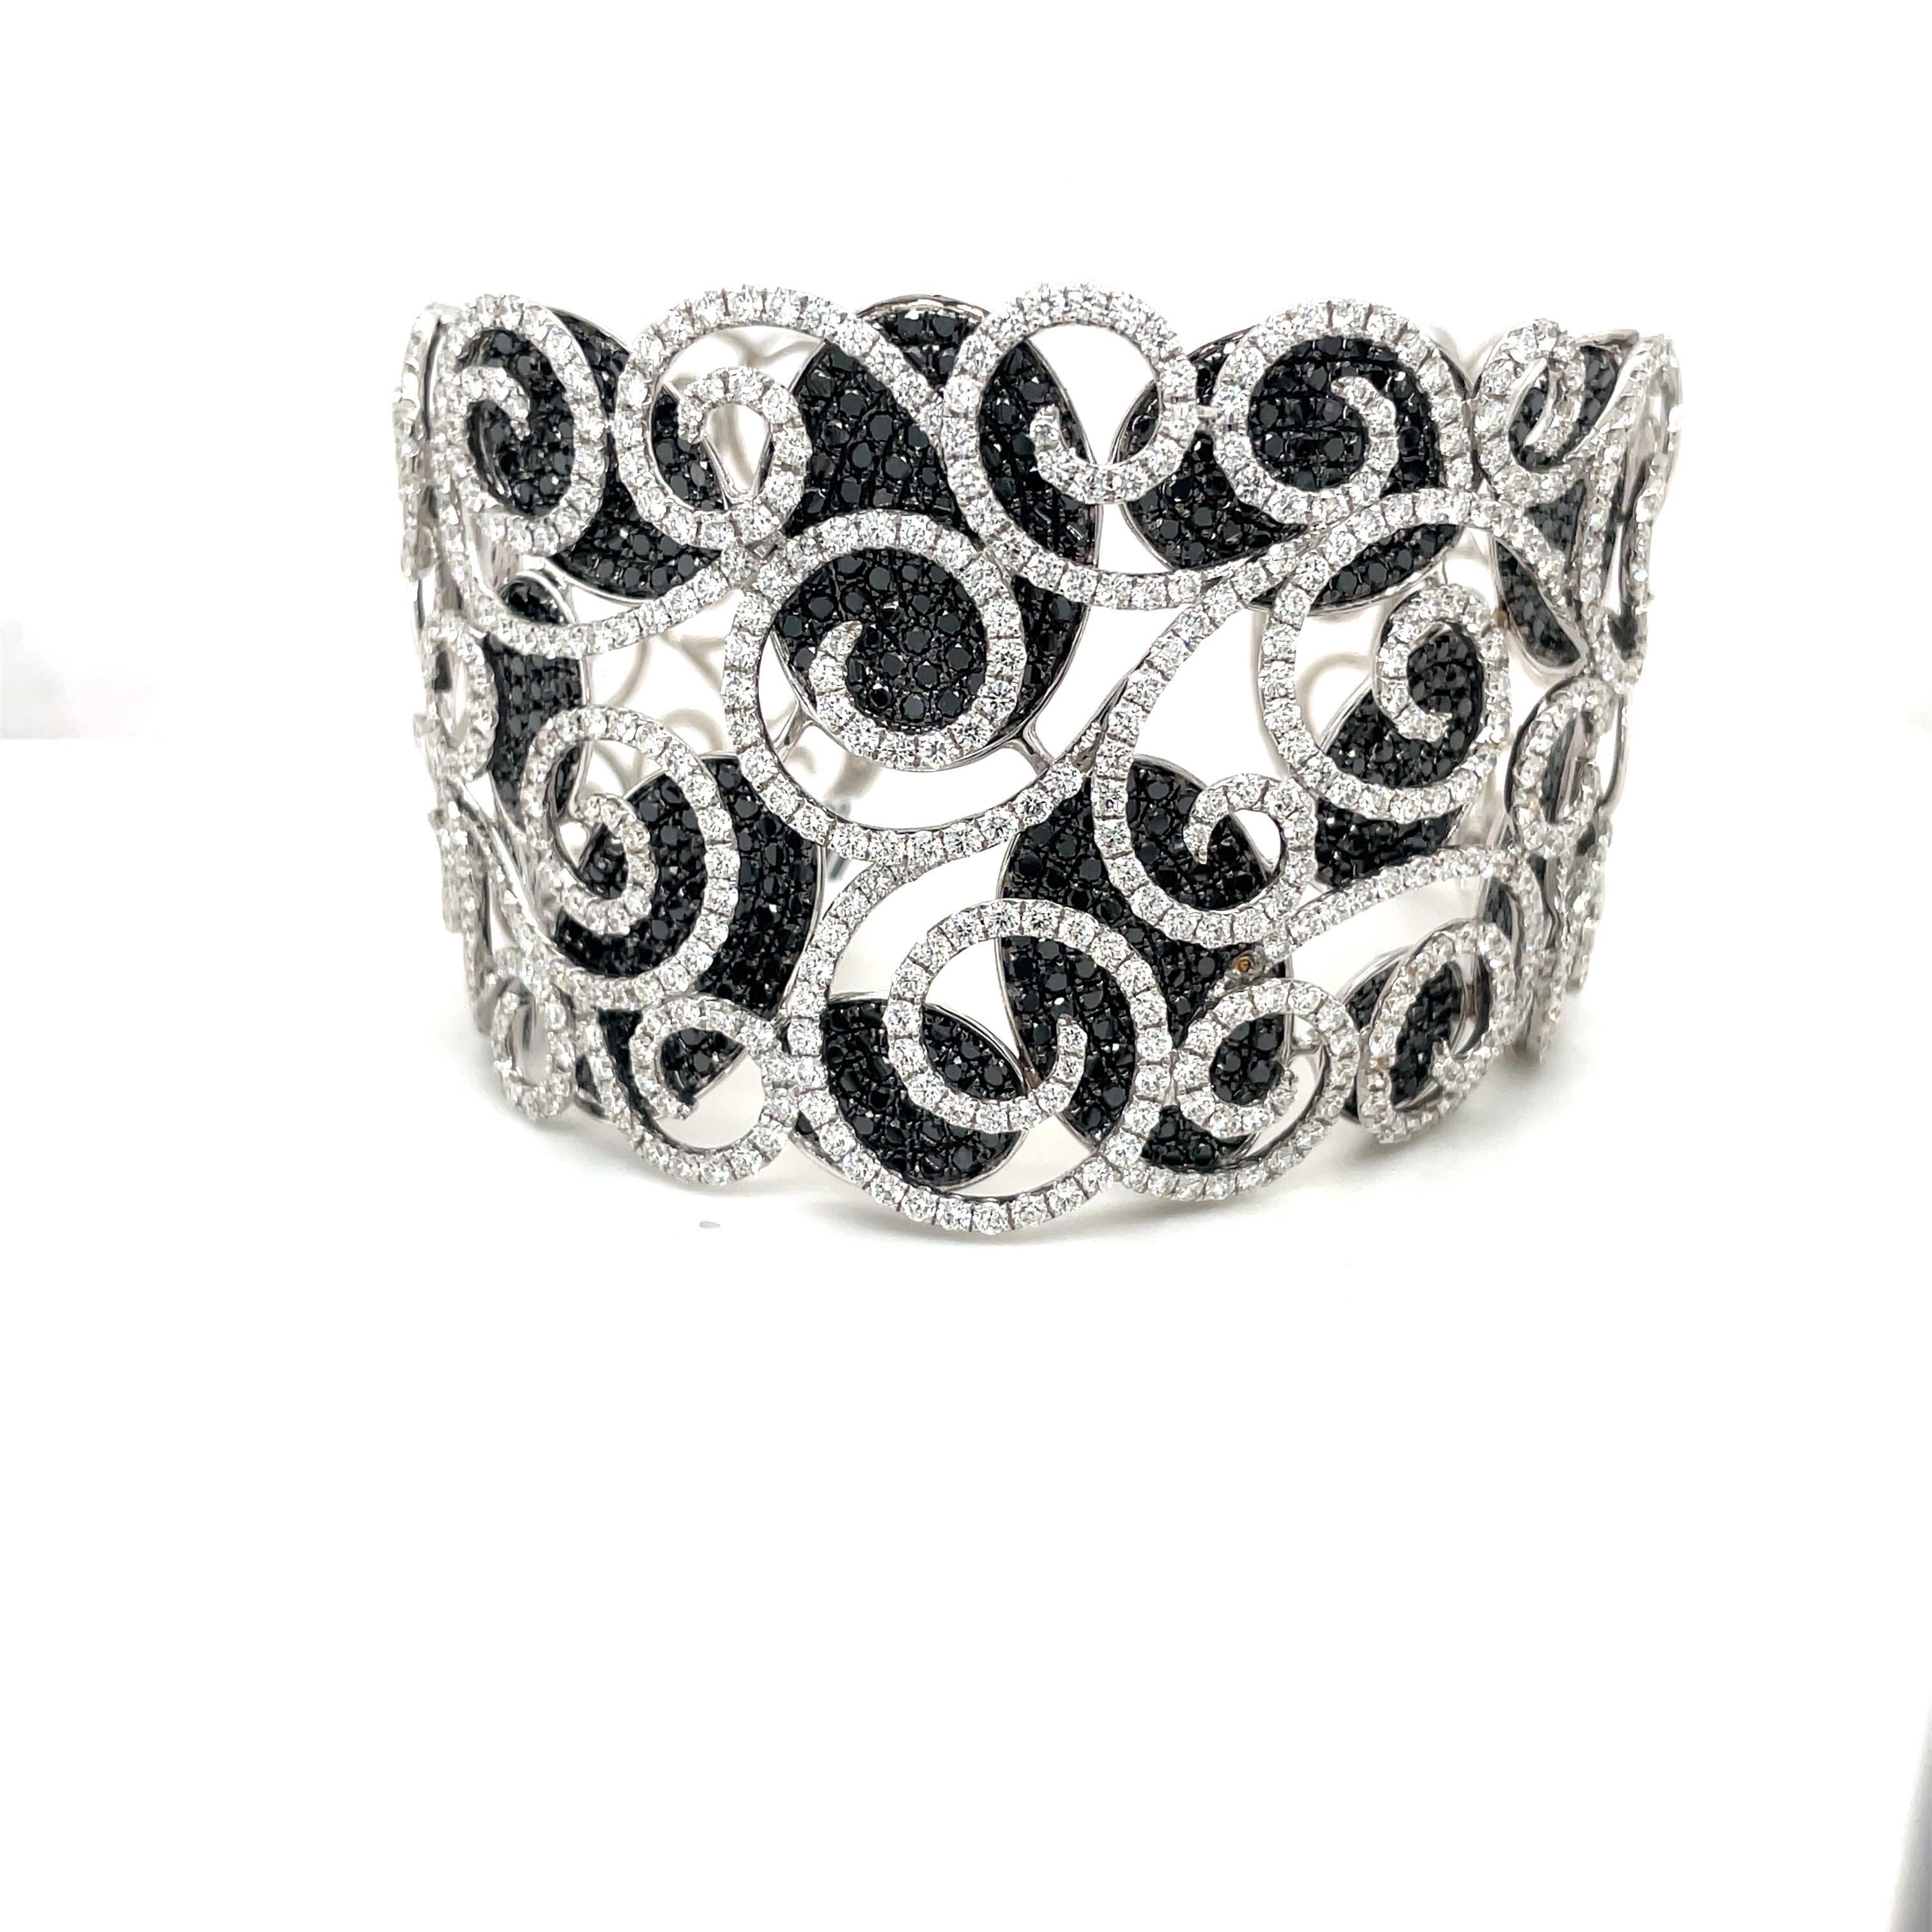 Black and white diamond pavé open-scroll motif cuff bracelet. Set in 18-karat white gold, the white diamonds are set in a scroll pattern which overlay the black diamond ovals. The cuff is 1.75